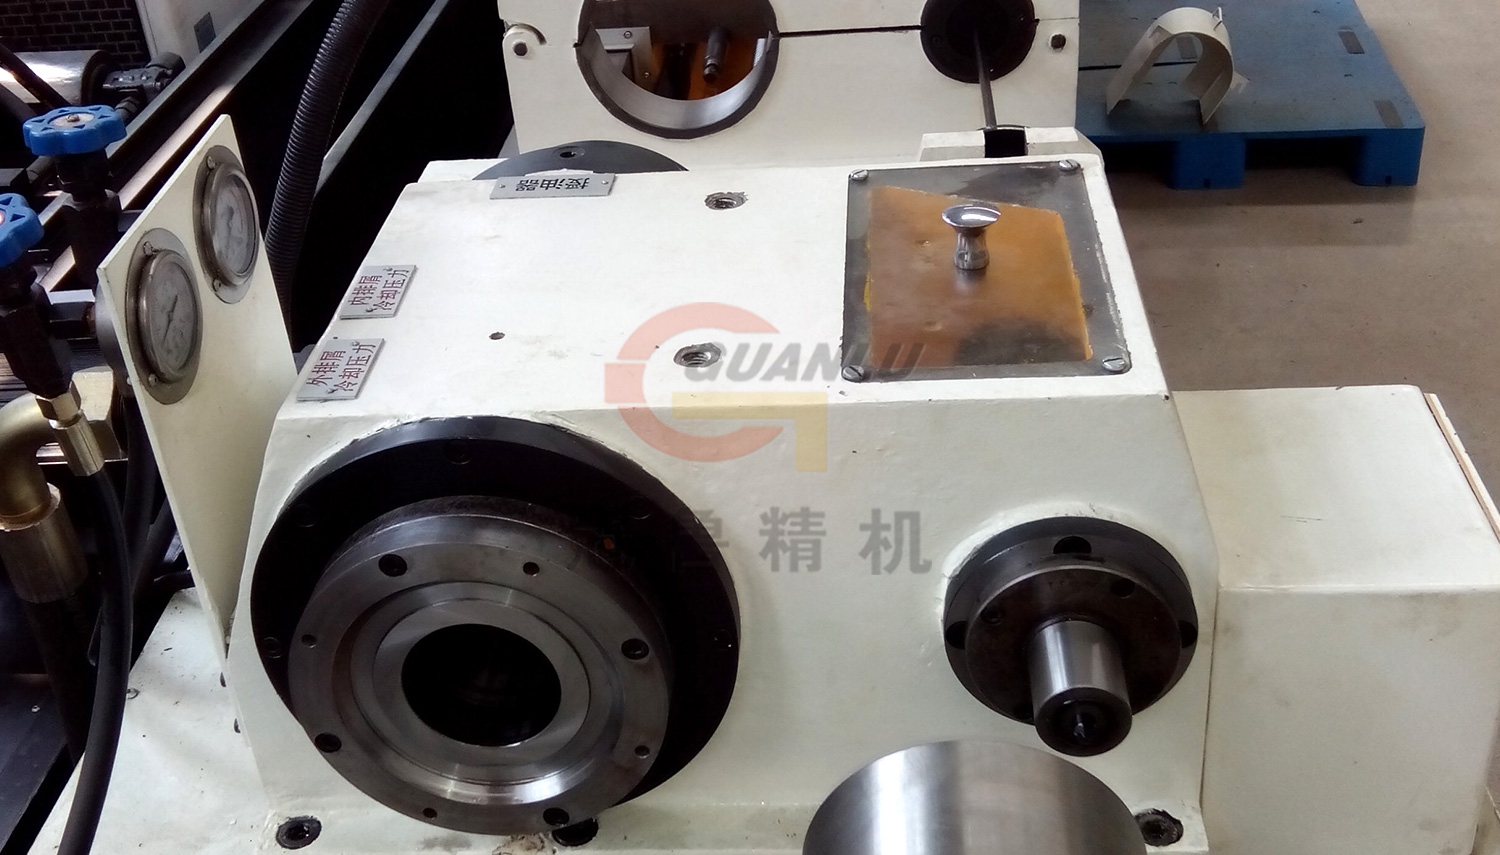 BTA drilling and gundrilling combined machine